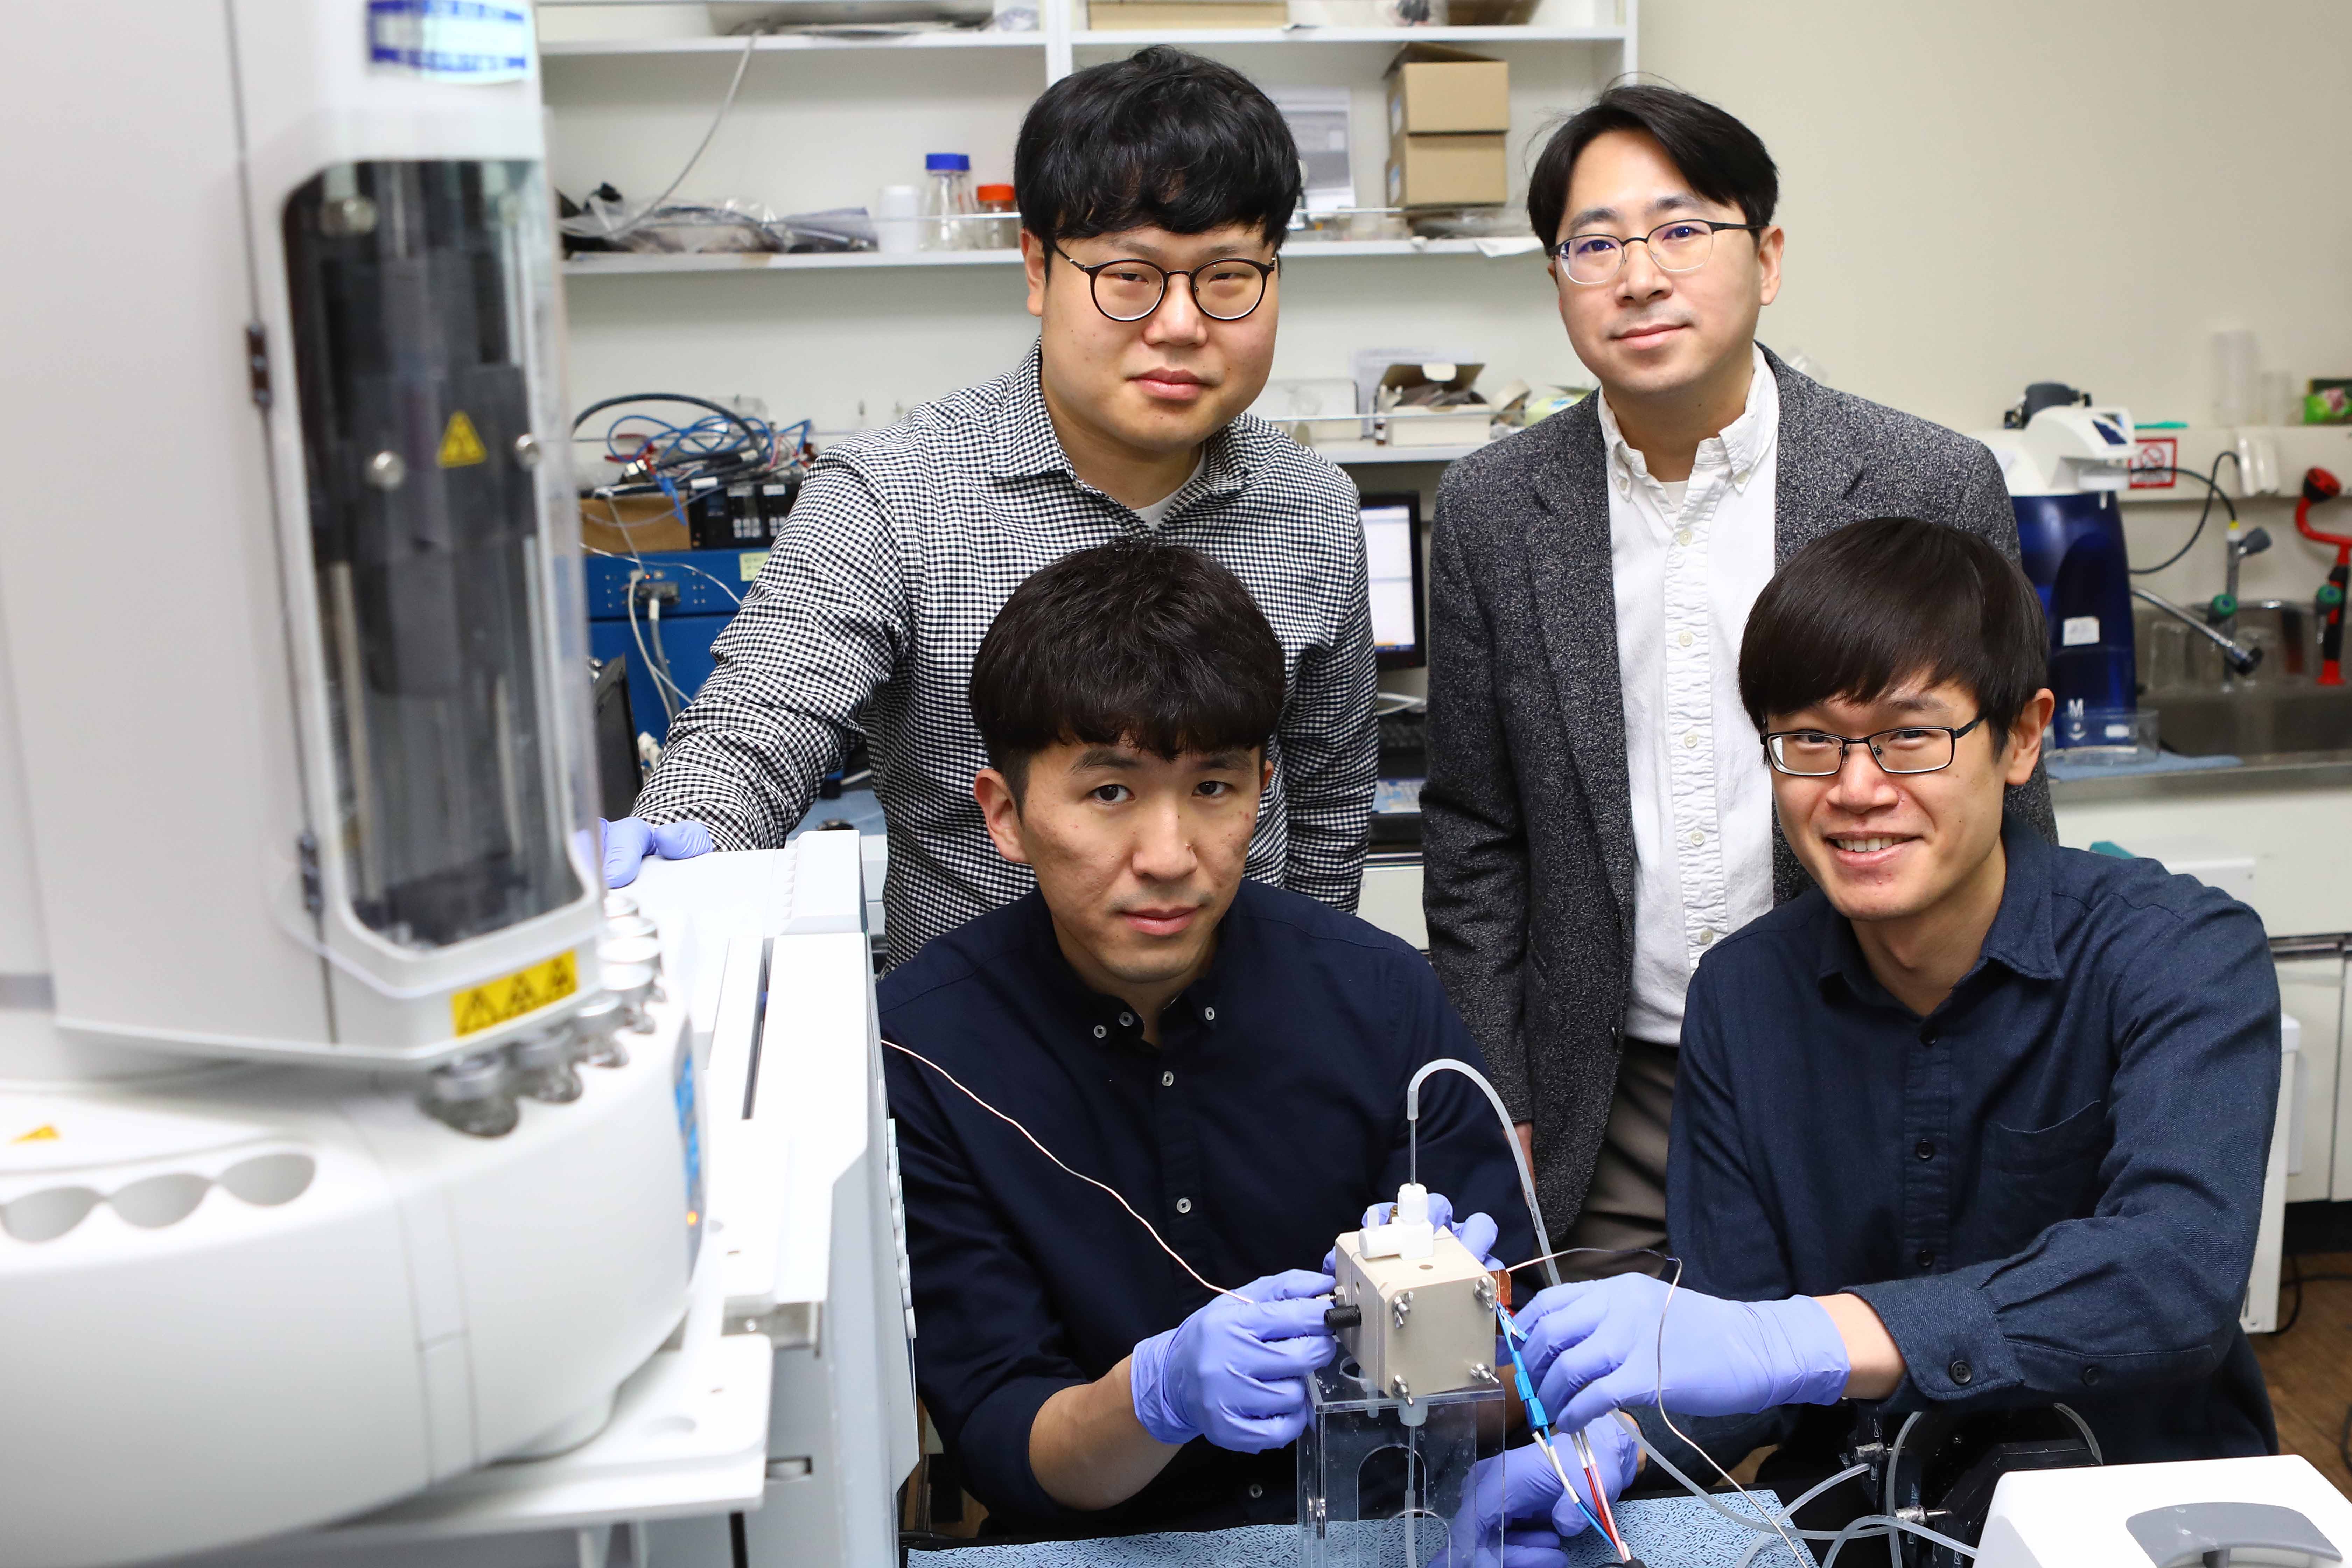 (Clockwise from back left) PhD Candidate Hakhyeon Song, Professor Jihun Oh, Dr. Ying Chuan Tan, and M.S. Candidate Kelvin Berm Lee